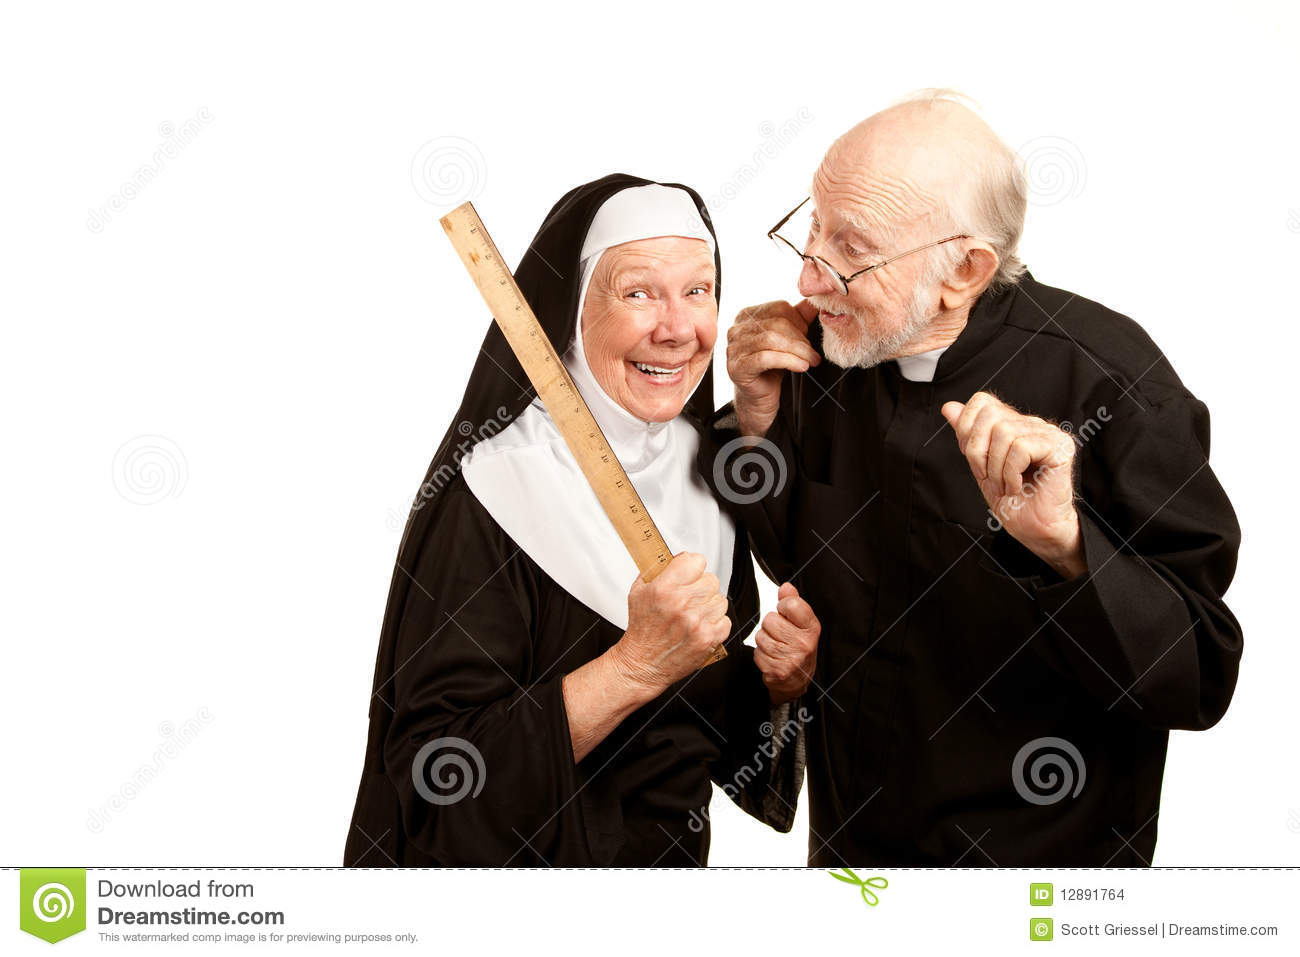 Friendly Priest Admonishes Angry Nun For Using Ruler As A Corporal